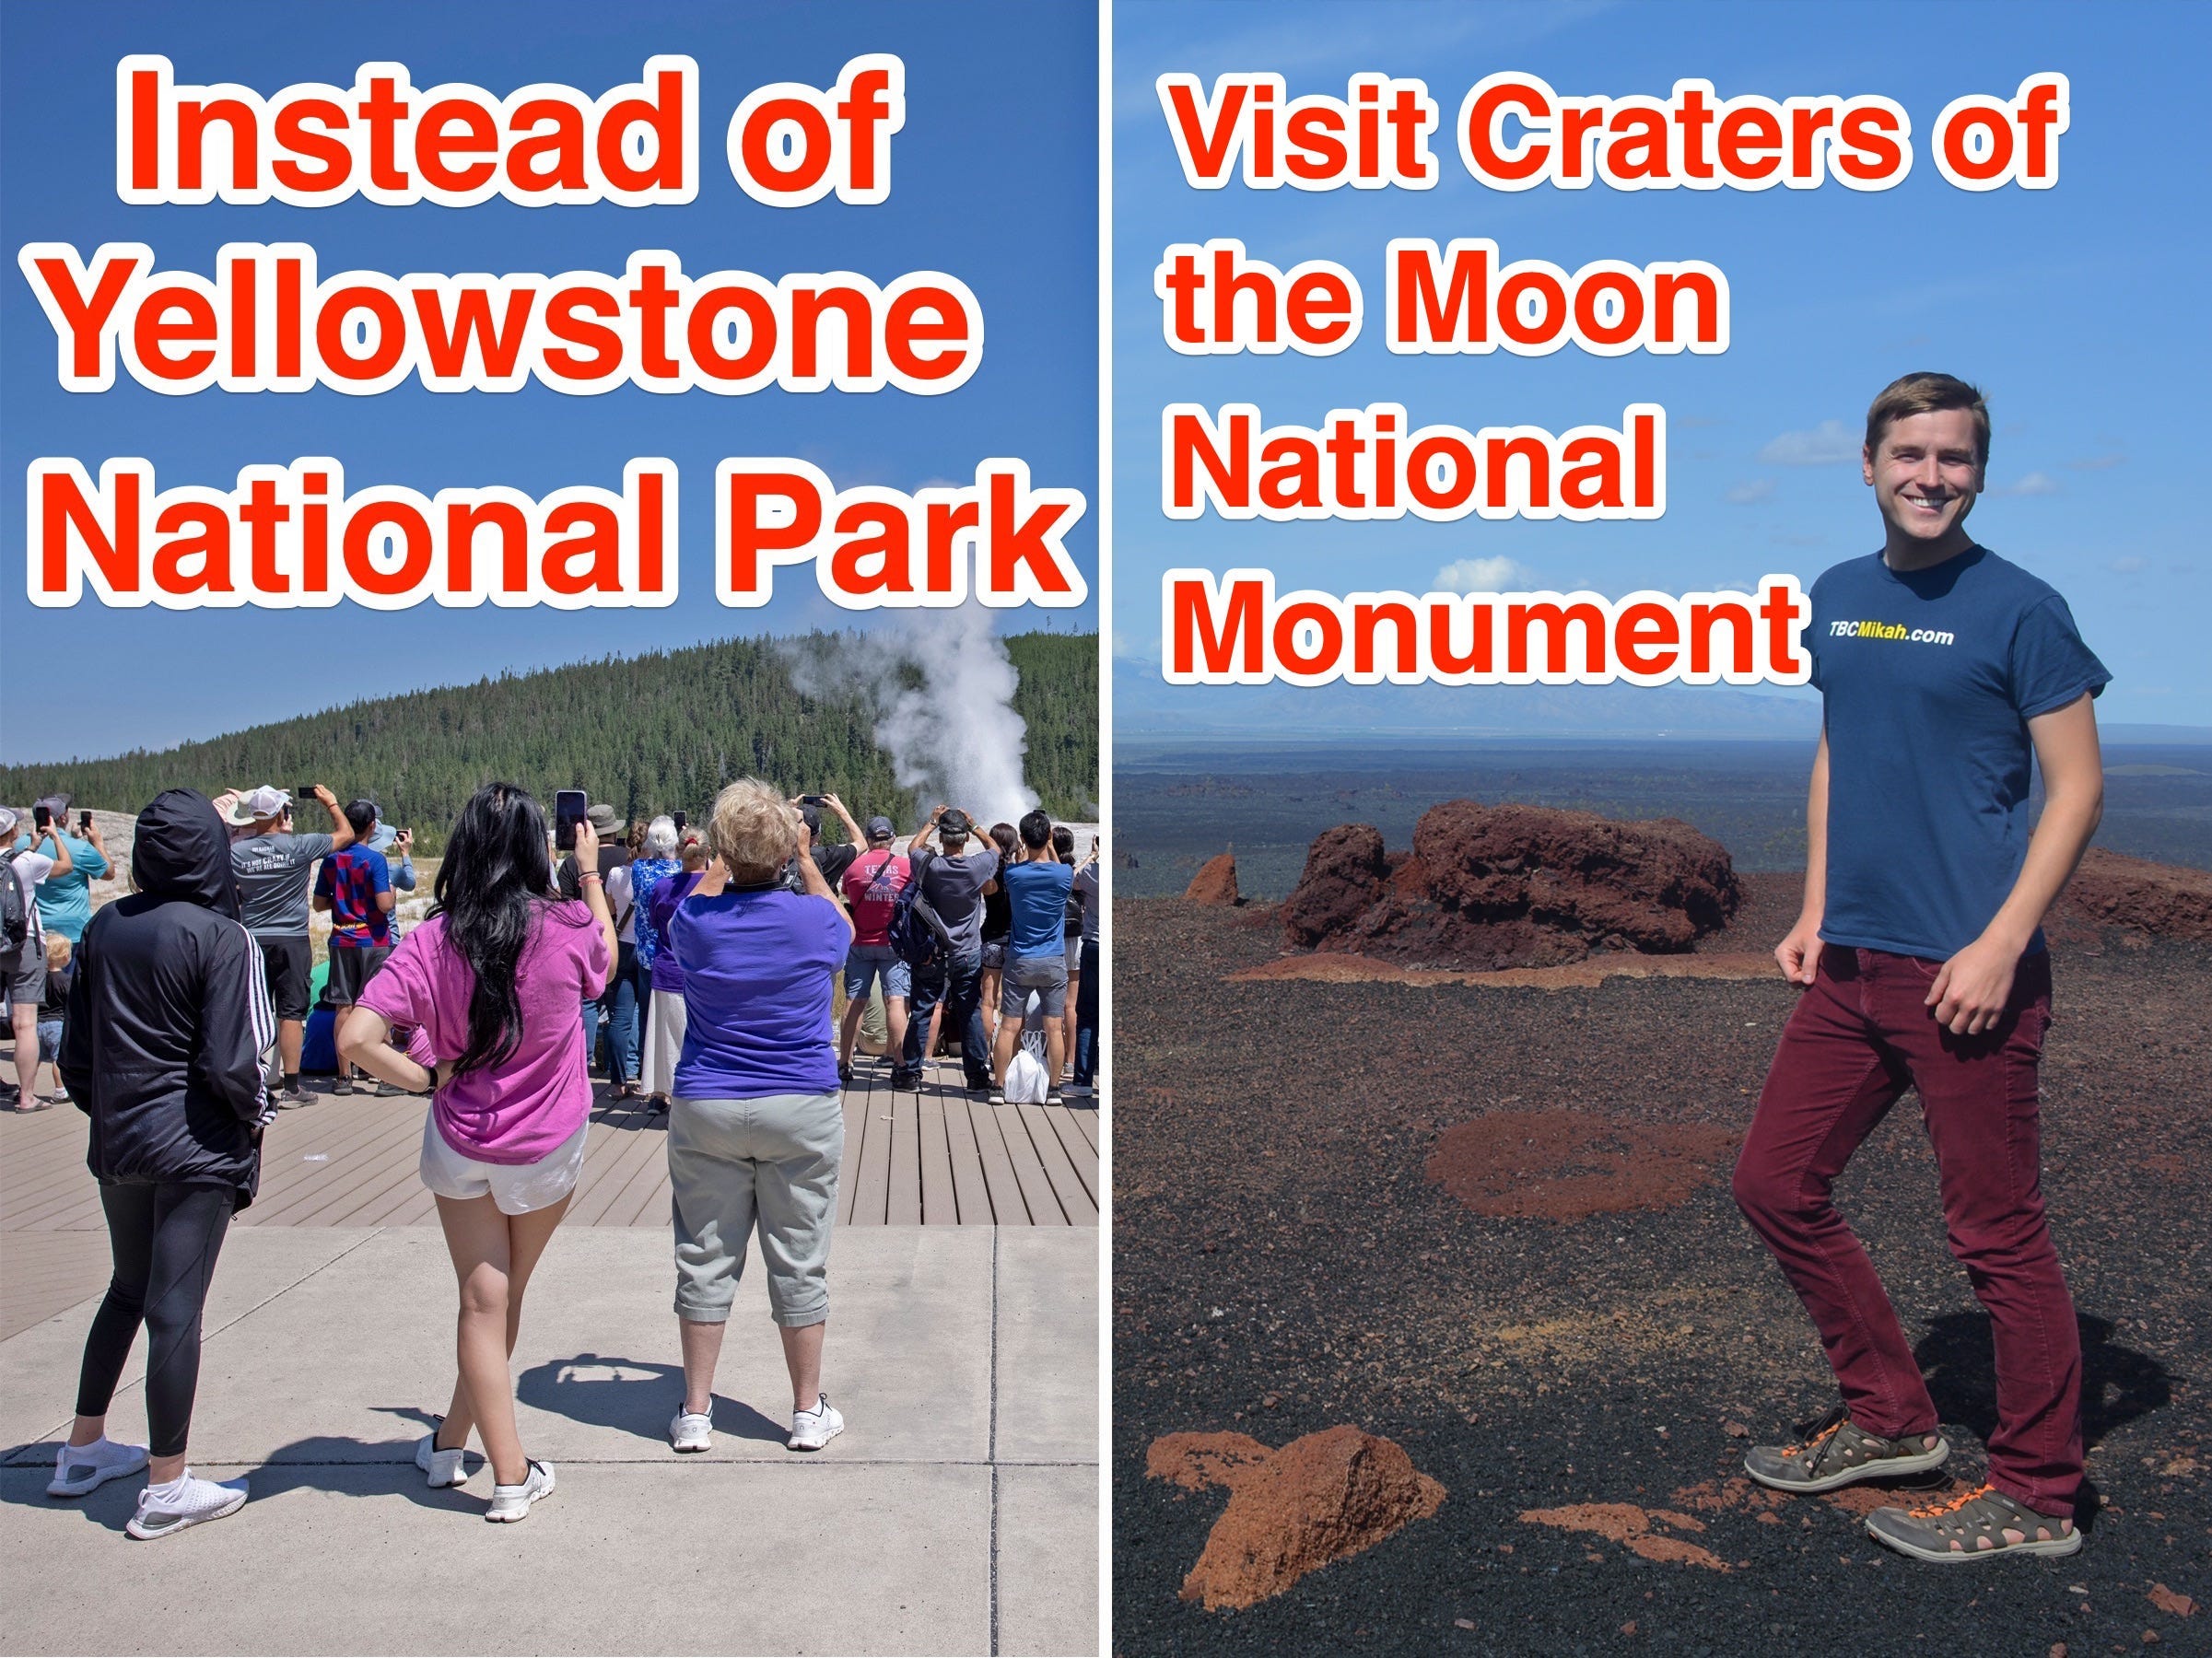 Left: "Instead of Yellowstone National Park" pictures with recent crowds at Old Faithful. Right: "Visit Craters of the Moon National Monument"